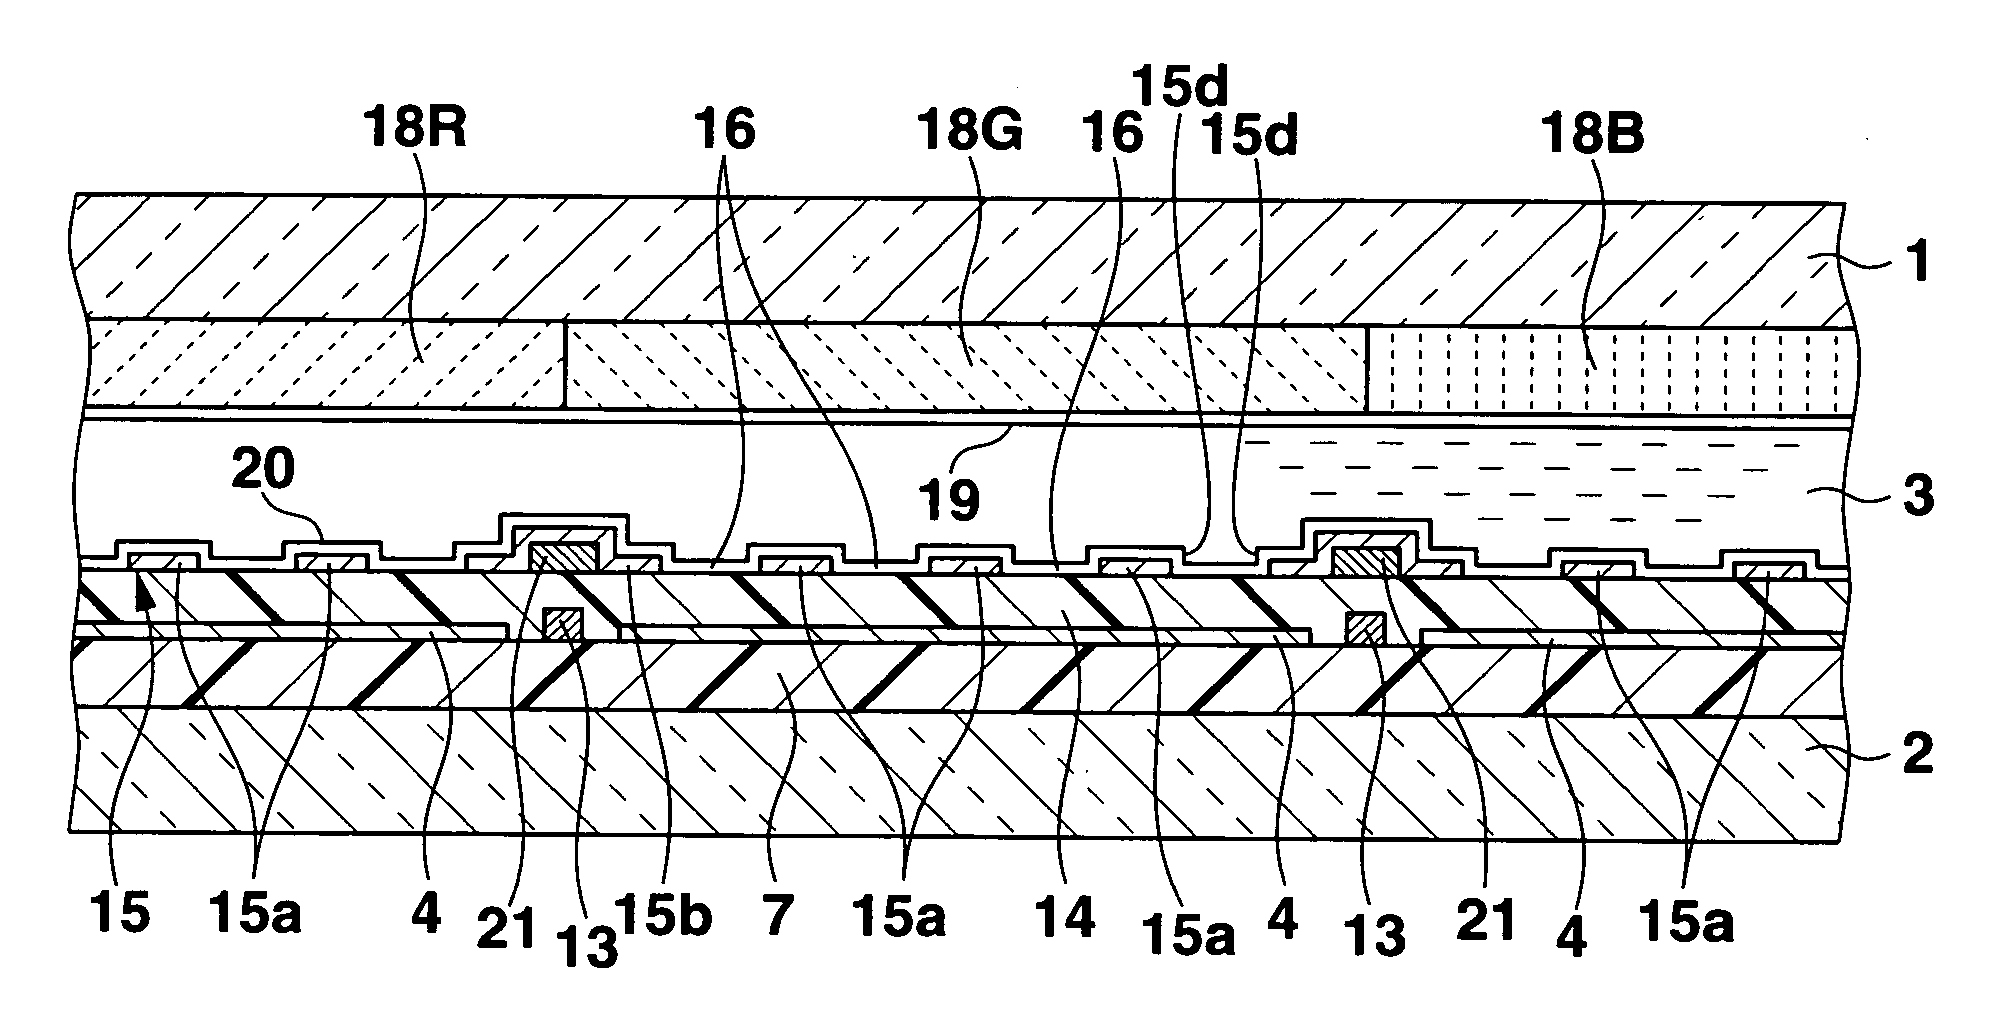 Liquid crystal display apparatus which performs display by using electric field in direction substantially parallel with substrate surfaces to control alignment direction of liquid crystal molecules